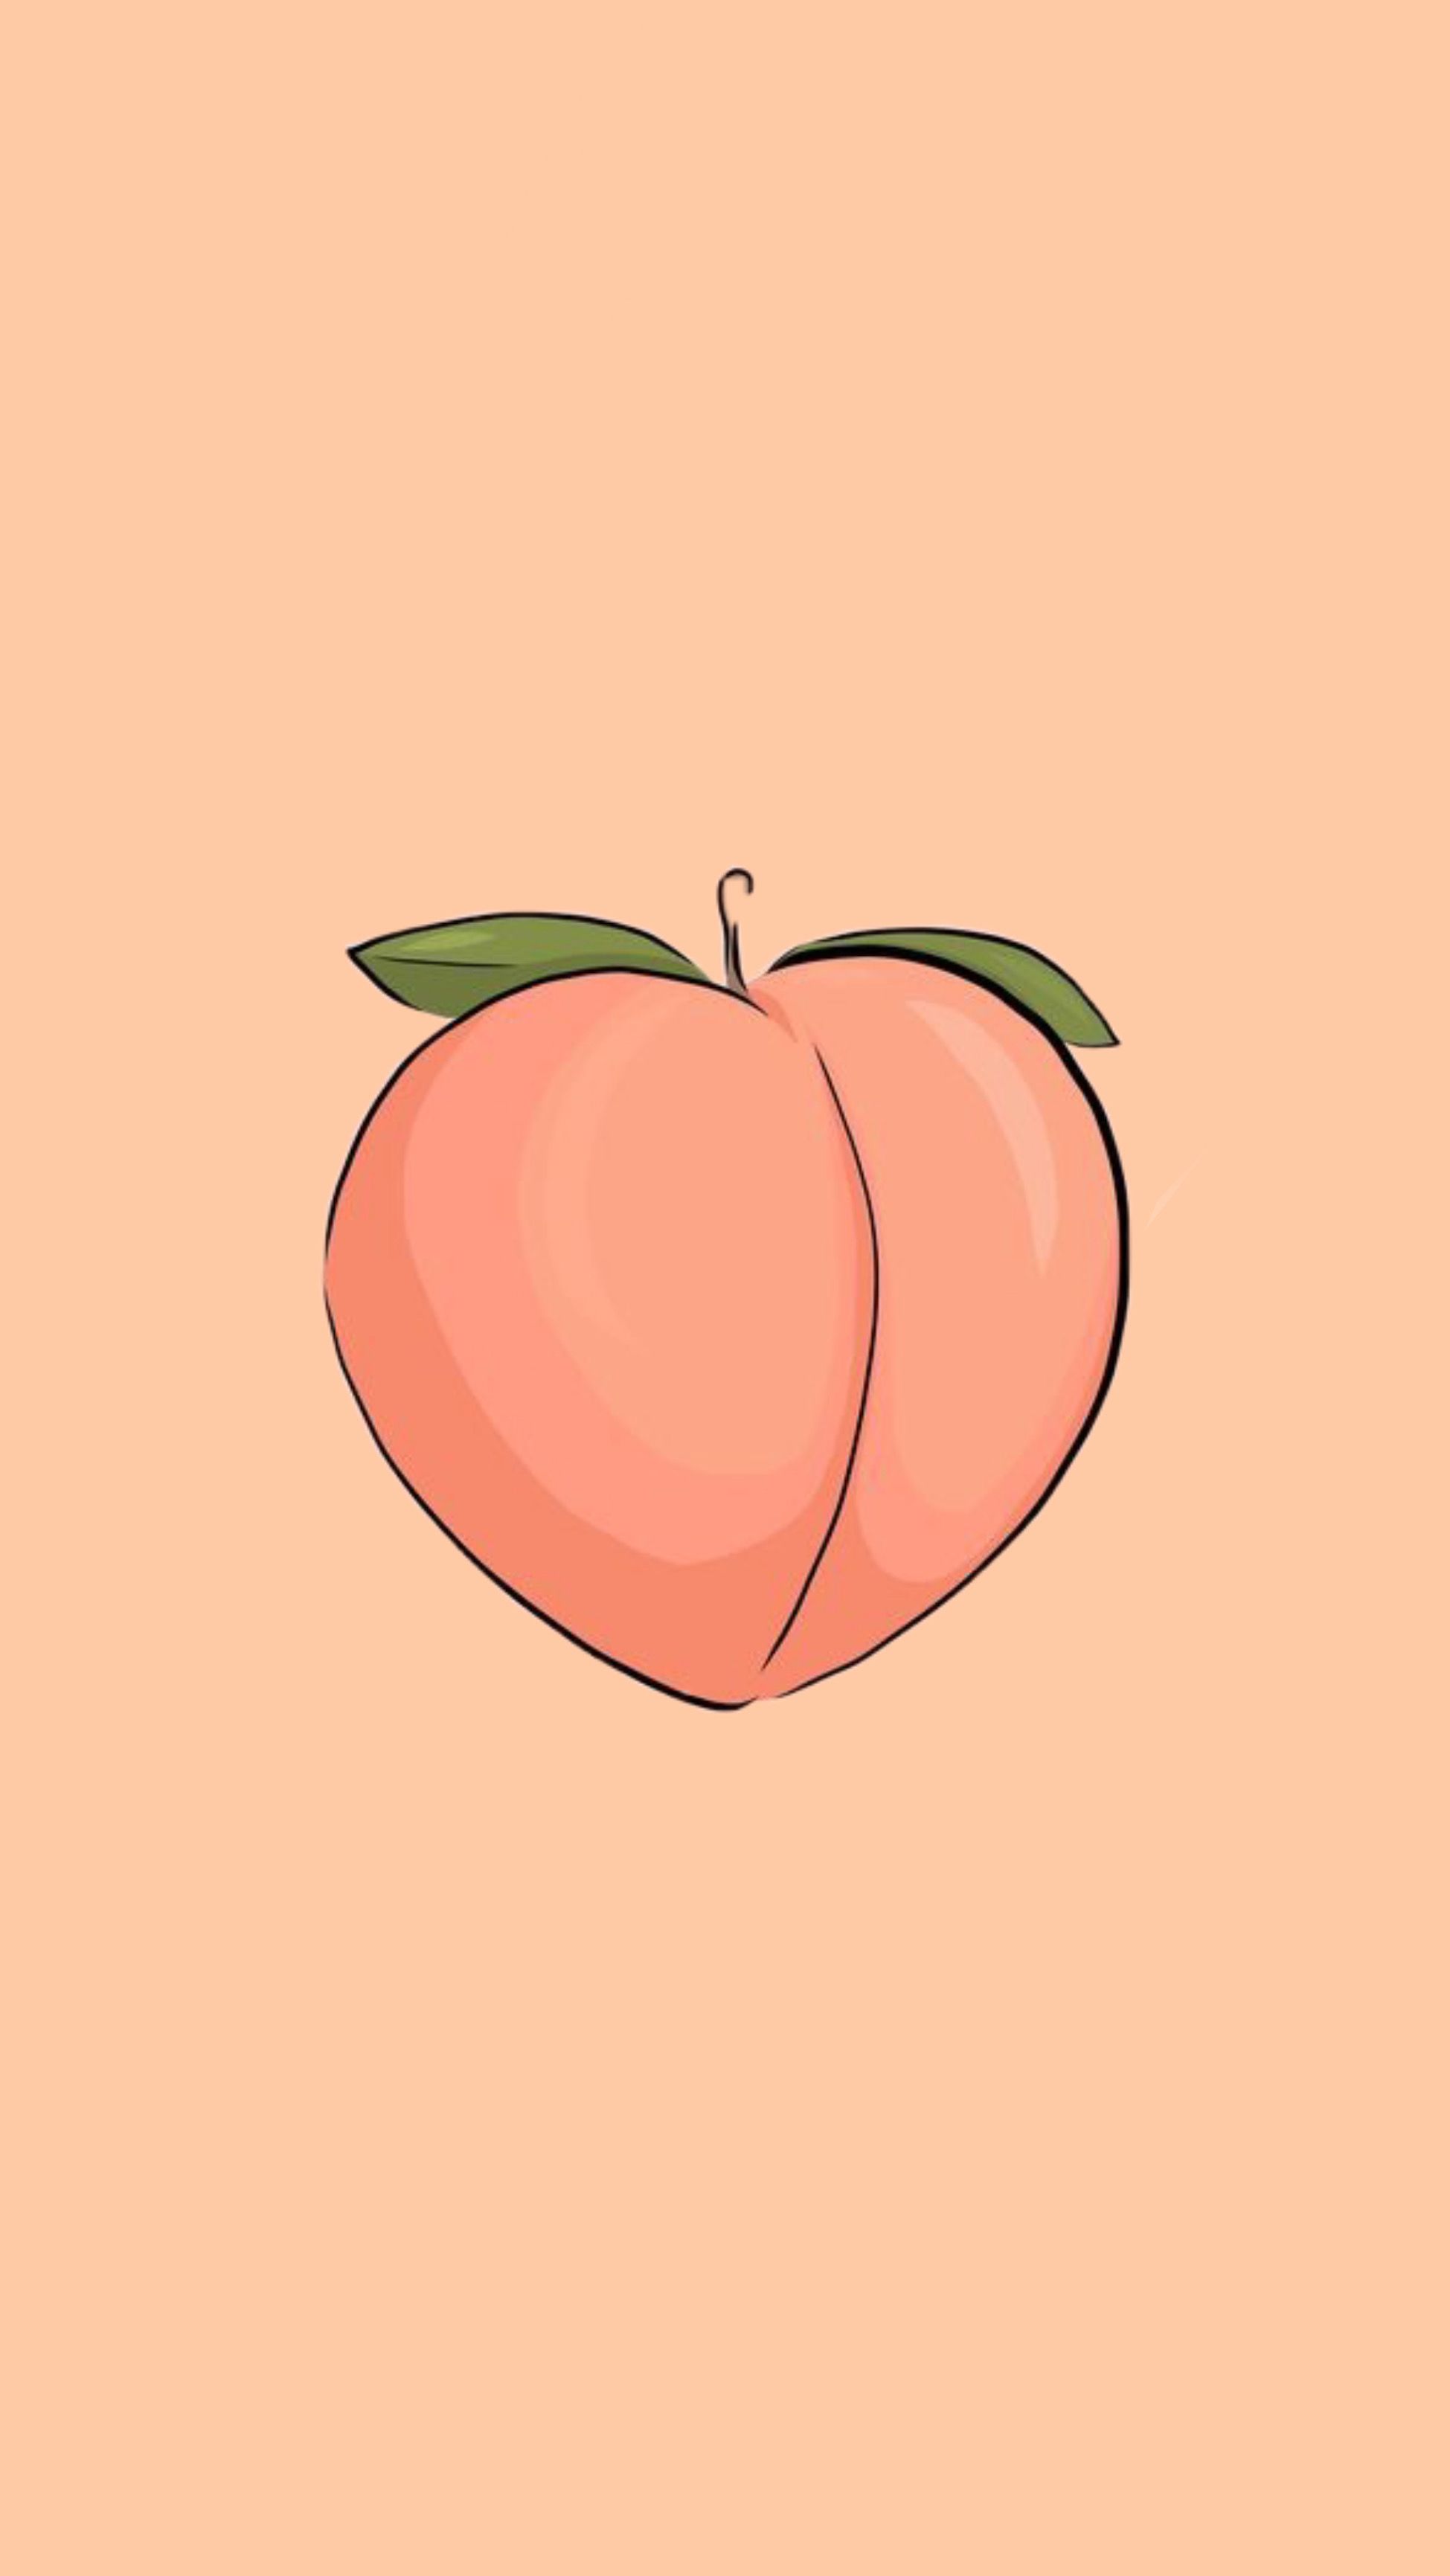 Iphone Peach Wallpapers